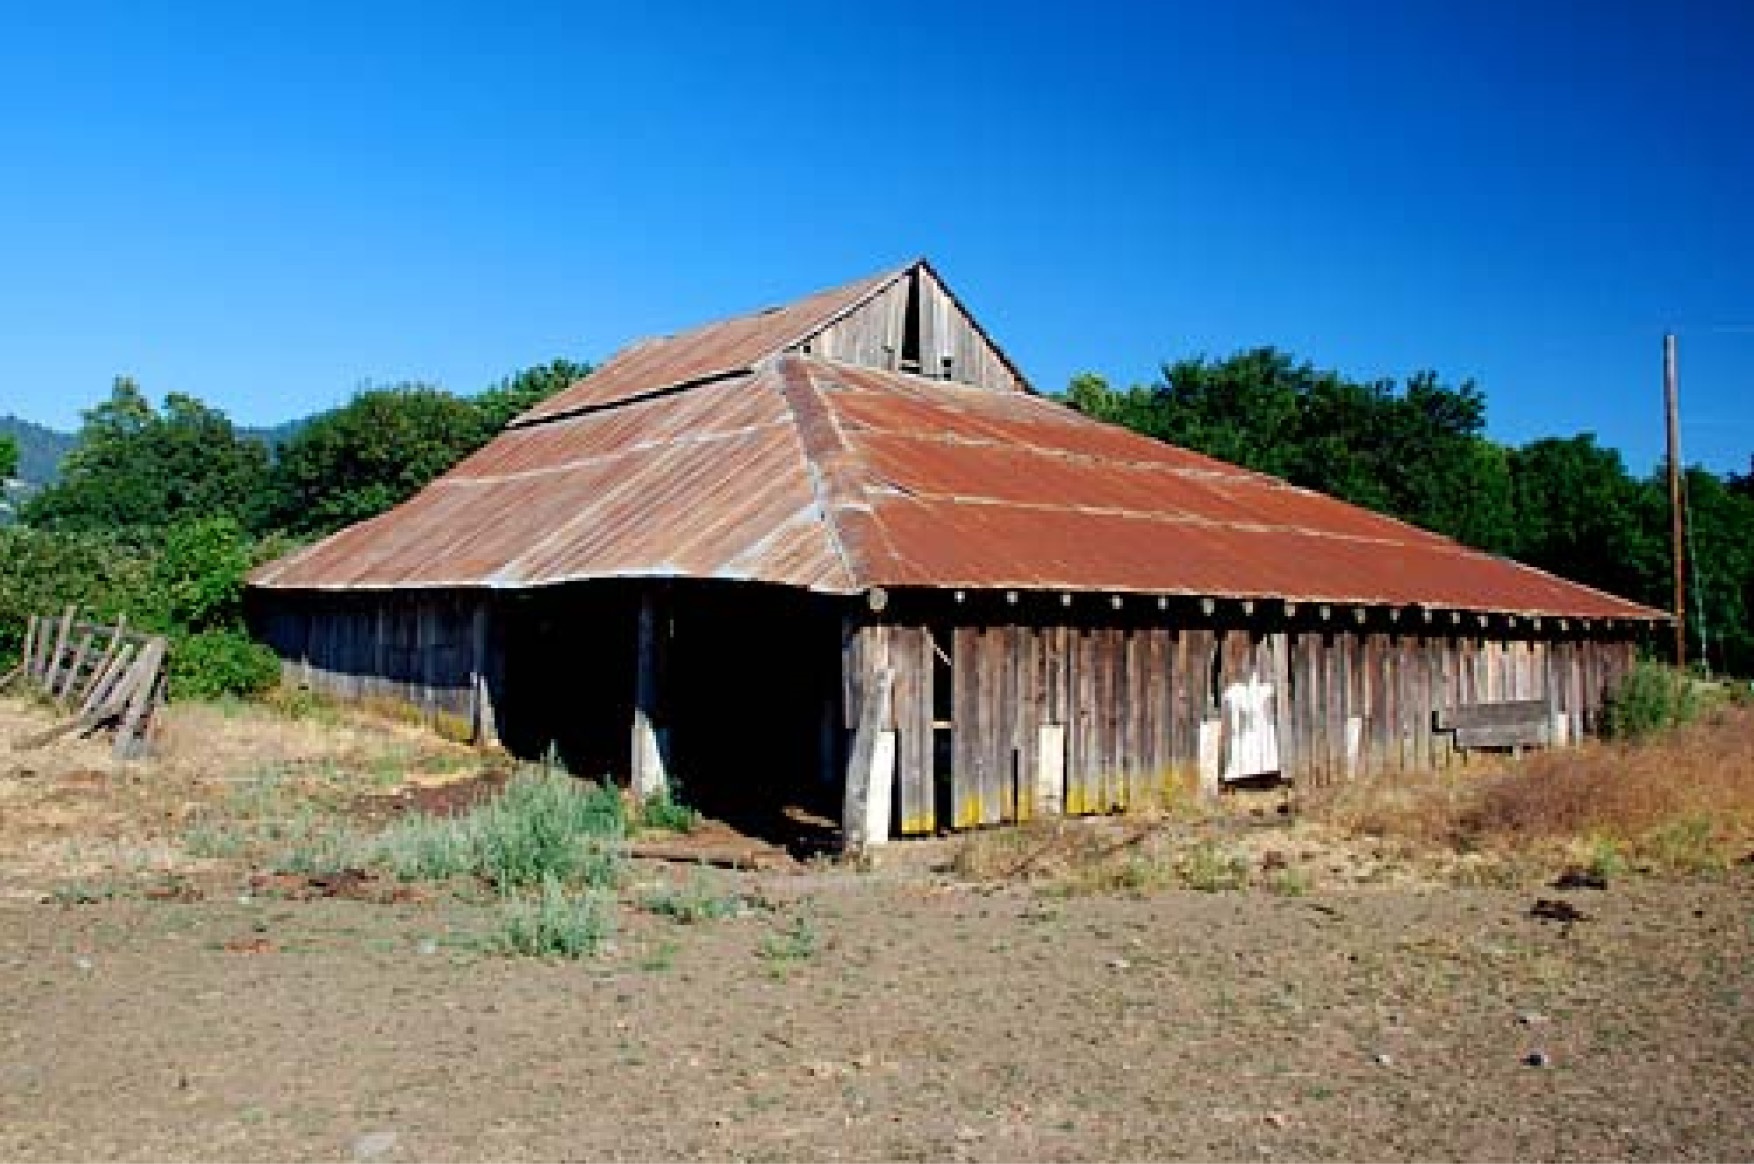 A rustic old barn on the Birdseye Ranch in Jackson County near the Rogue River.